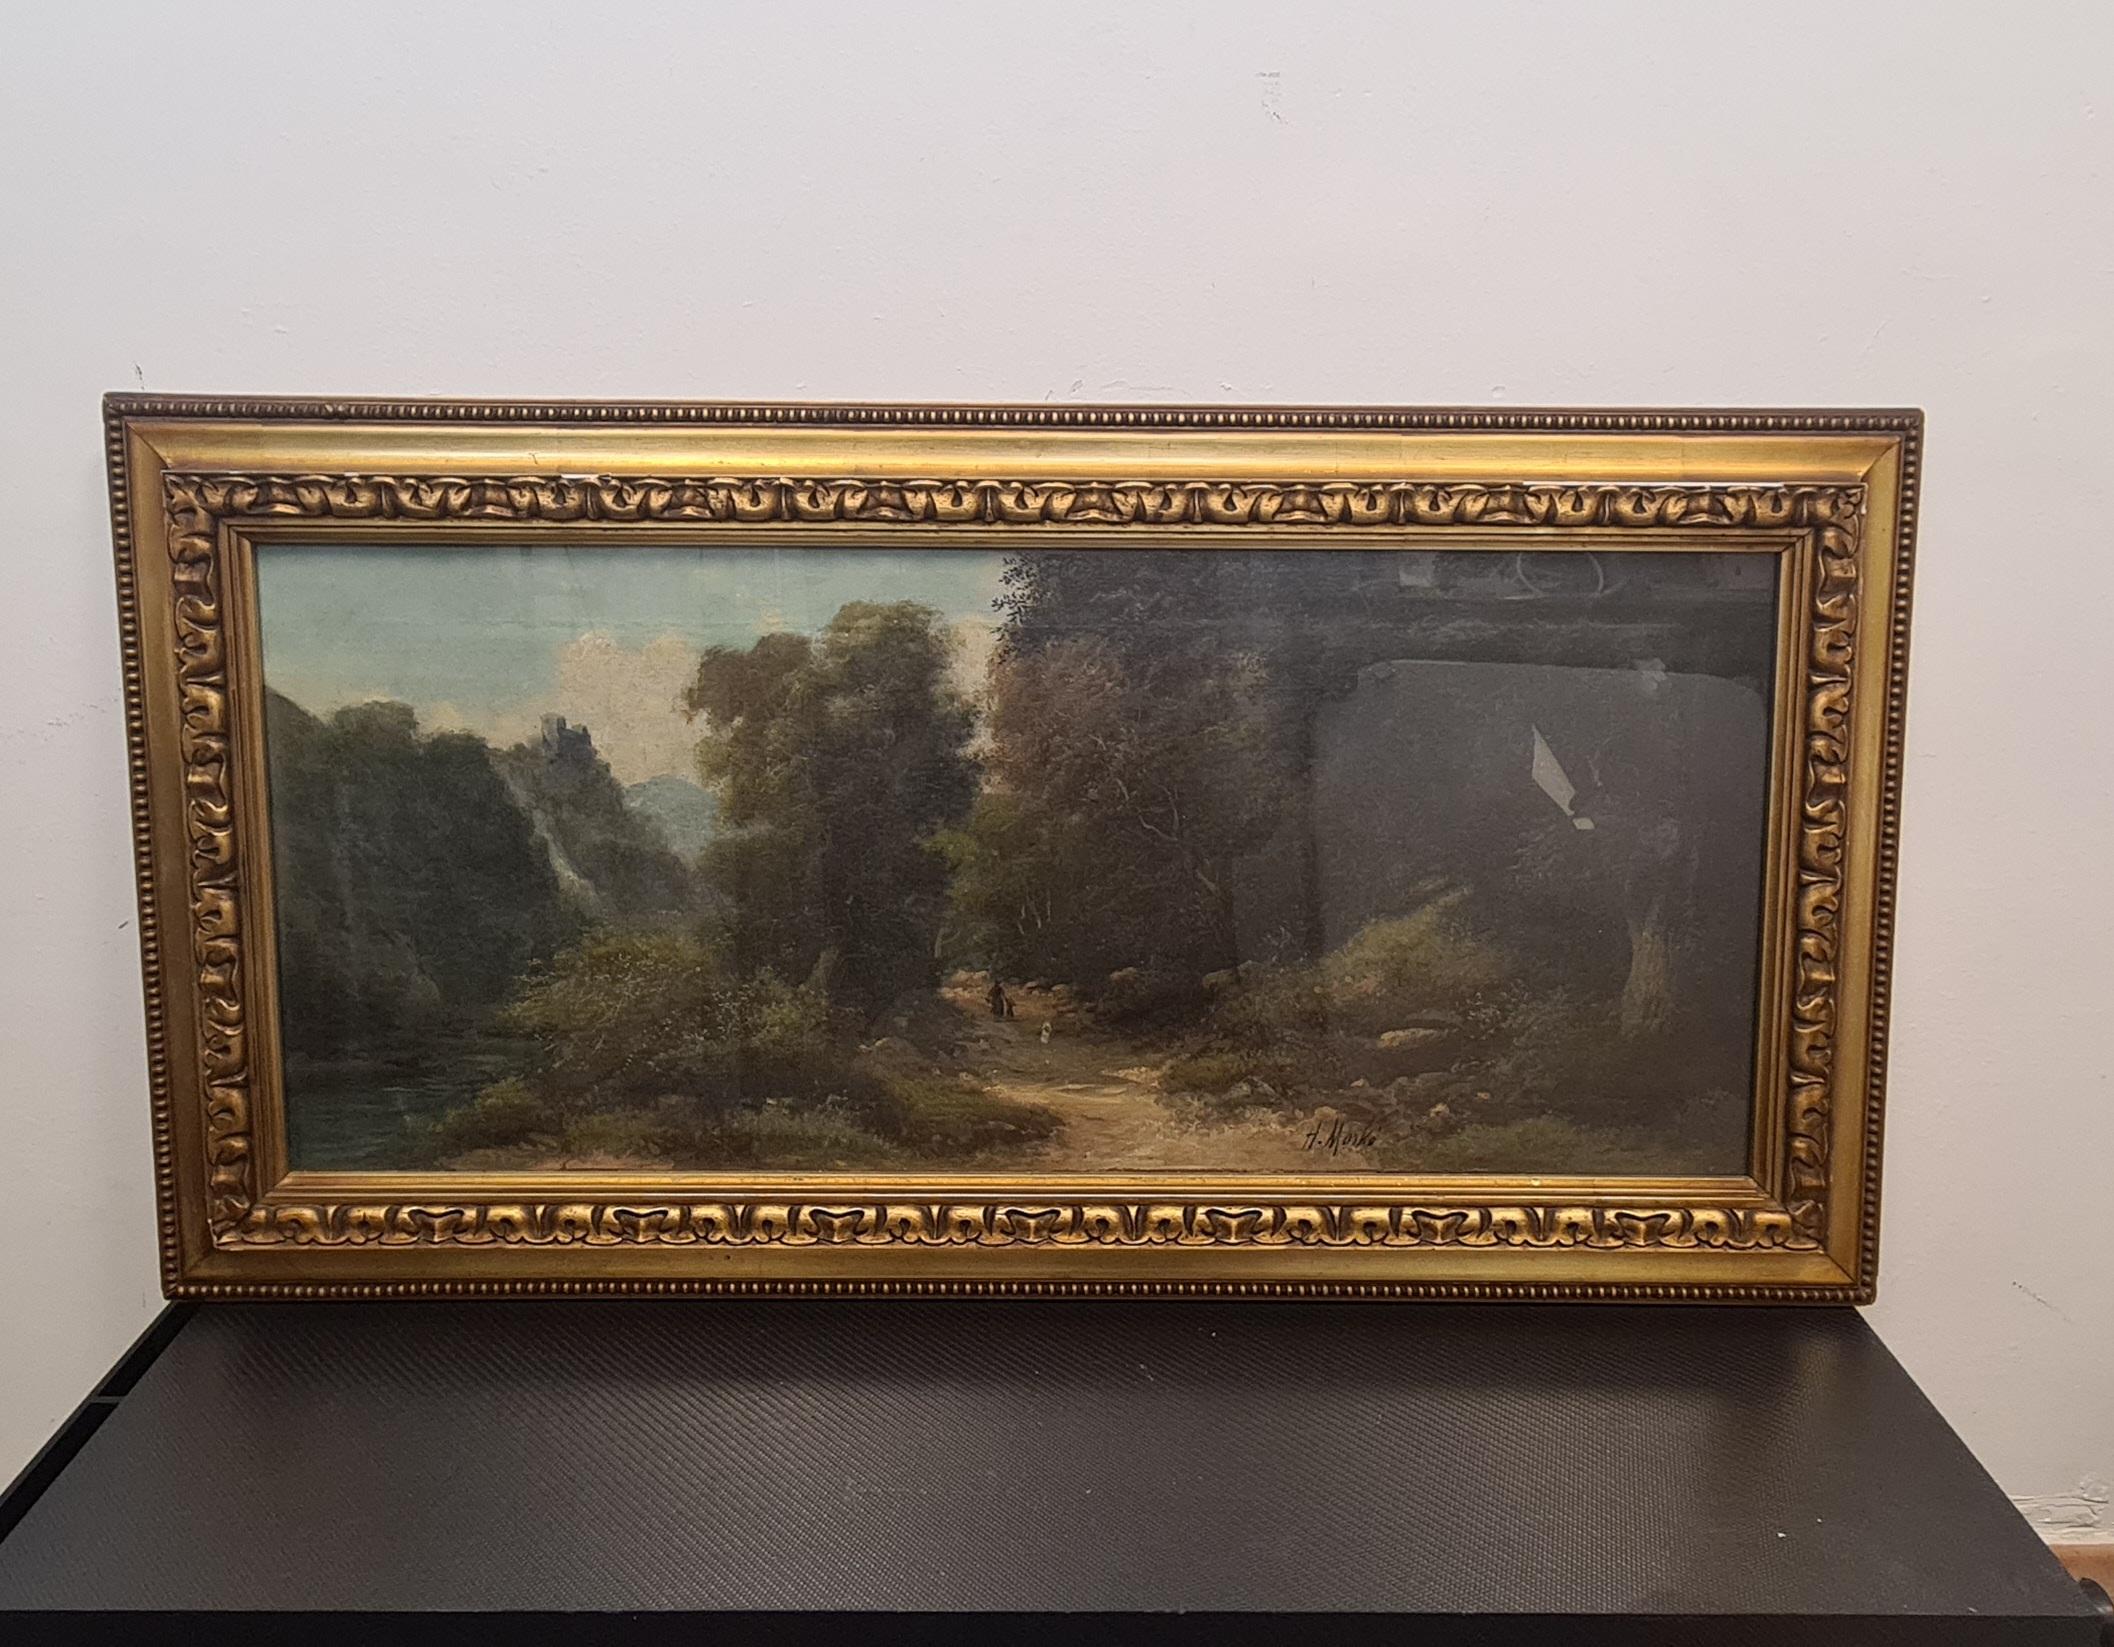 Pair of paintings by landscape painter Henry Markó.

No. 2 oil paintings on canvas depicting landscape scenes.

One depicting a forested dirt path traveled by a character in the distance. In the background on the left is a waterfall that flows into